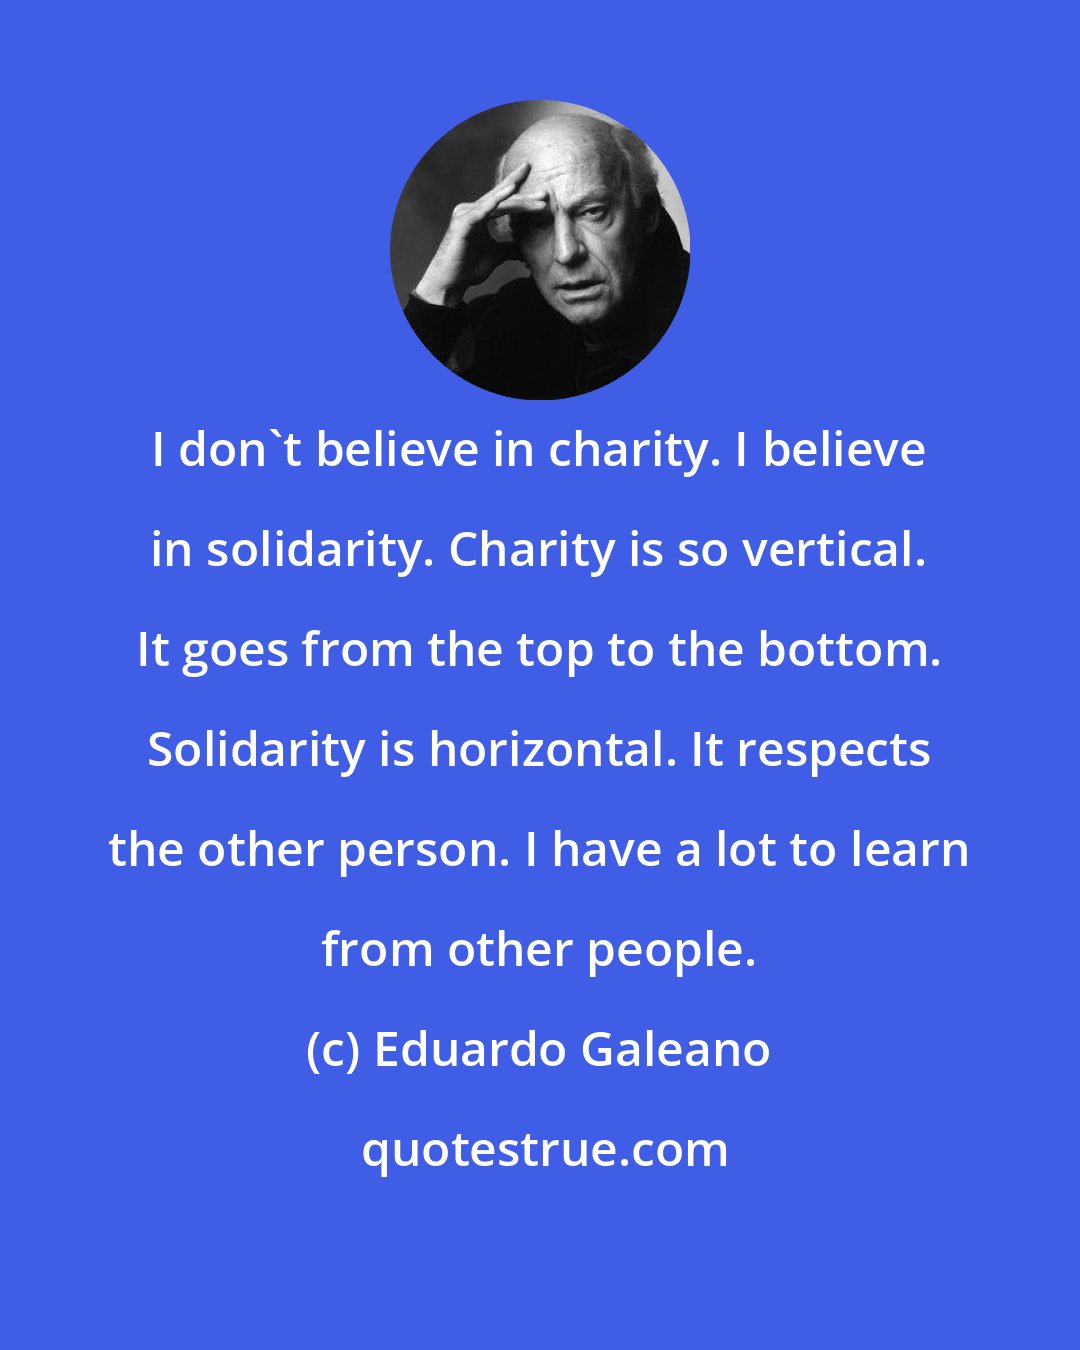 Eduardo Galeano: I don't believe in charity. I believe in solidarity. Charity is so vertical. It goes from the top to the bottom. Solidarity is horizontal. It respects the other person. I have a lot to learn from other people.